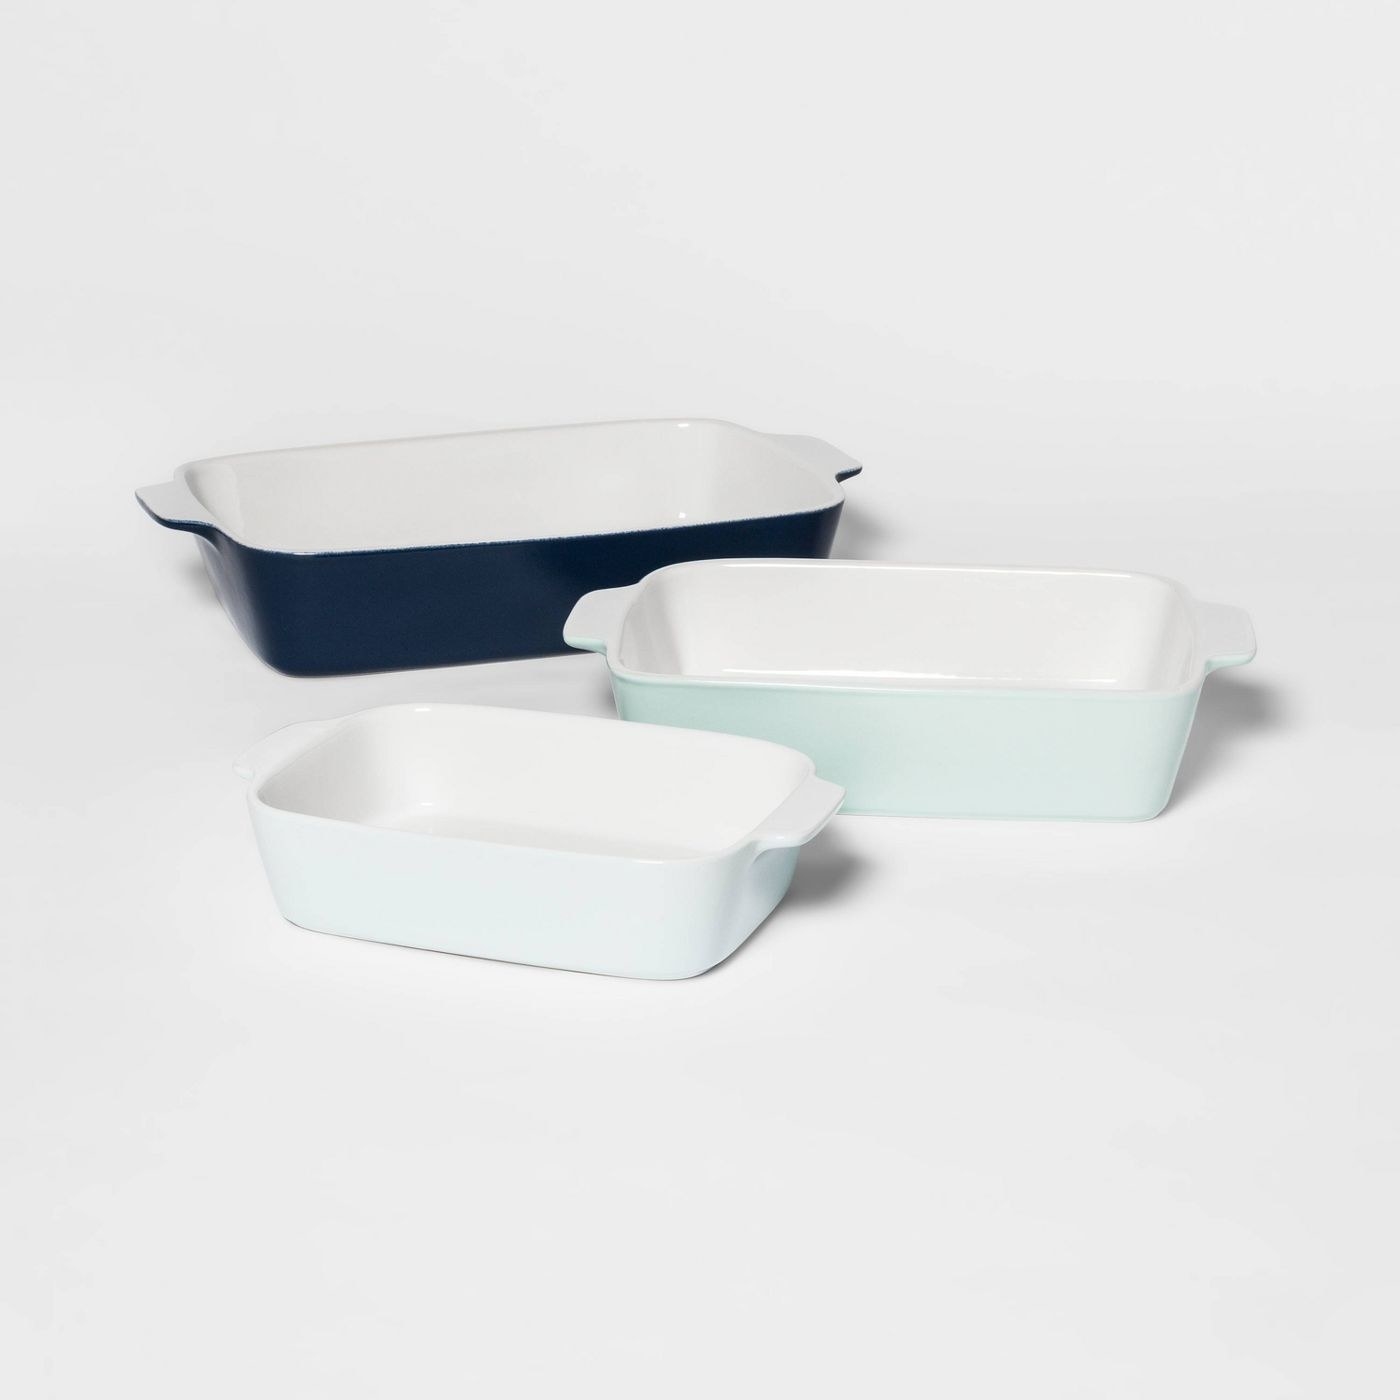 the bakeware set in different shades of blue